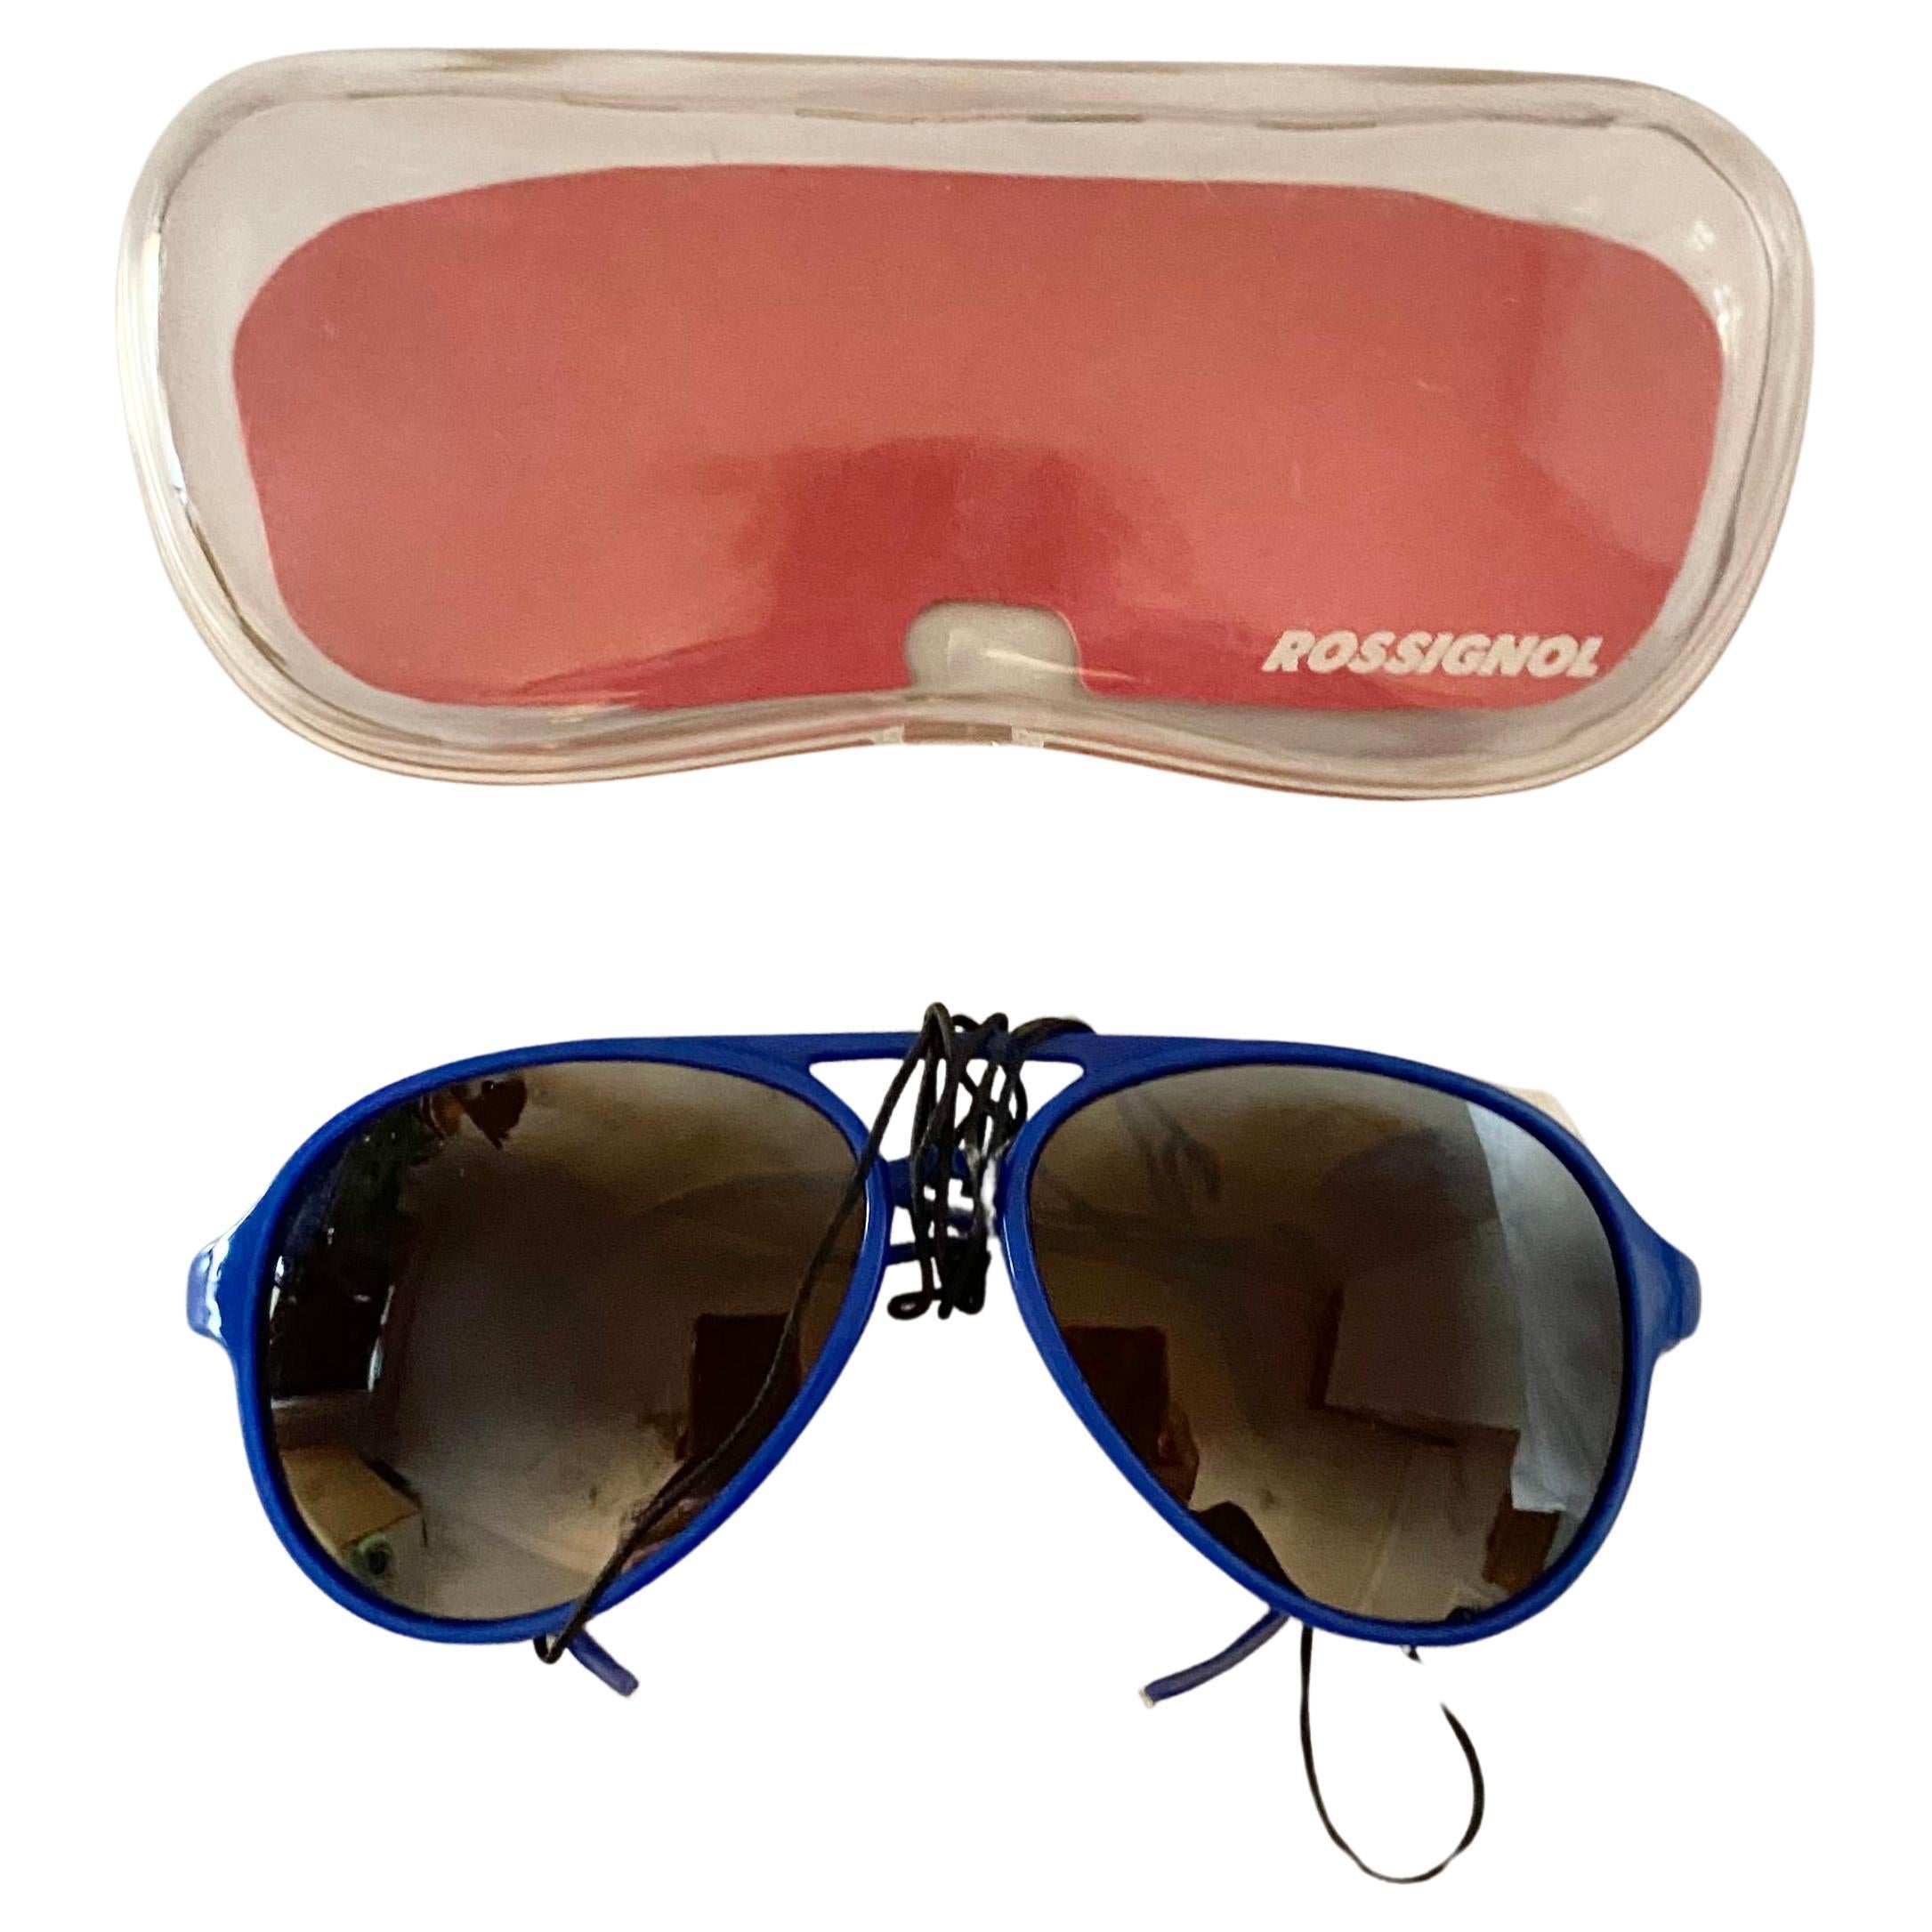 Offering premium protection and a secure fit, Rossignol's Mirrored Blue Frame Sunglasses, boasting white leather side shields and gradient dark brown lenses, are crafted in France to fit men and women alike, and boast adjustable temple ends, perfect